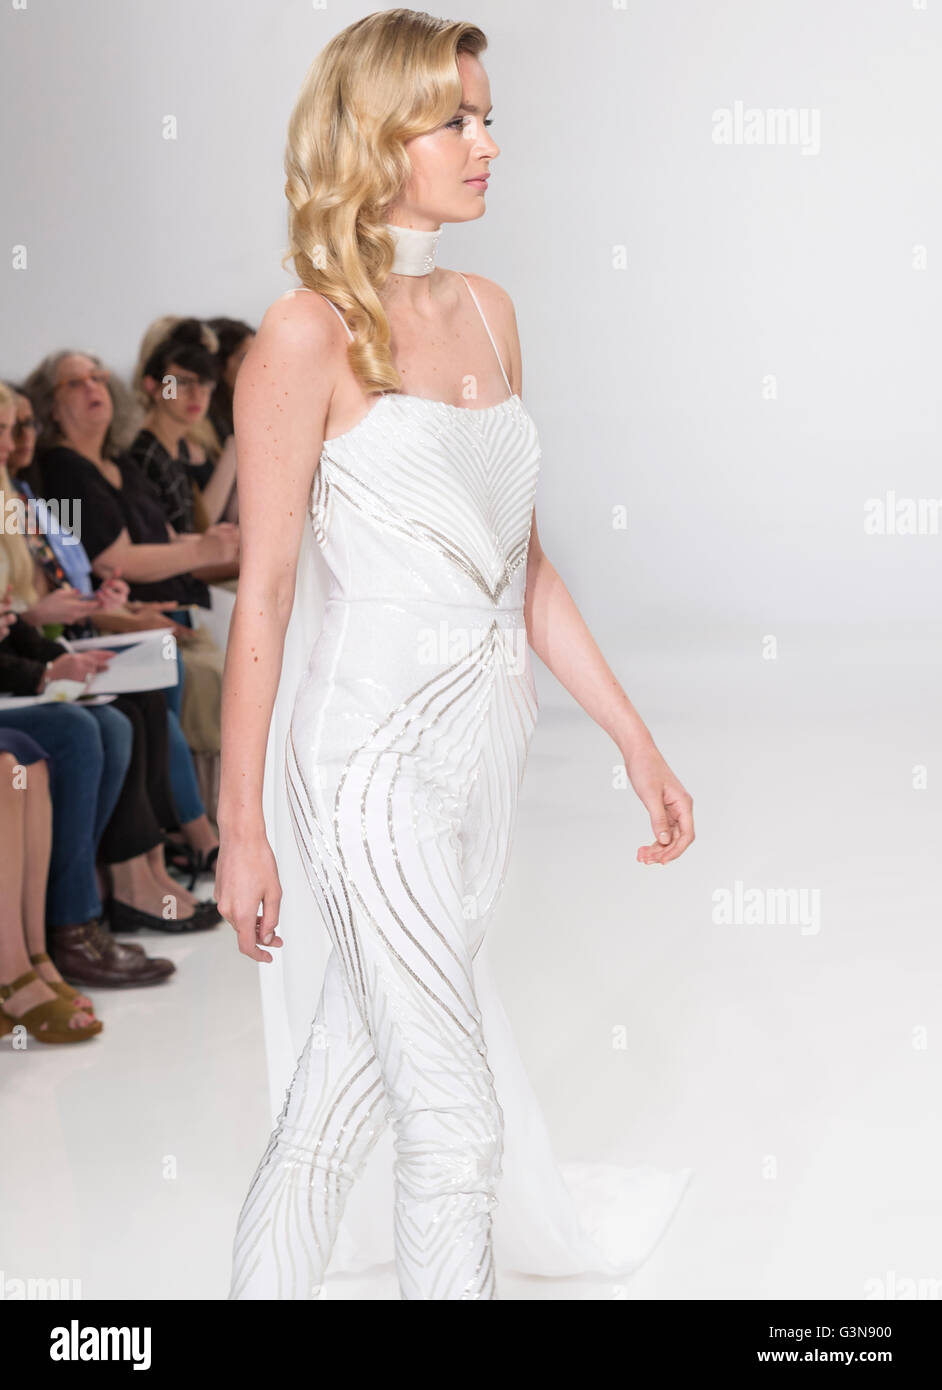 NEW YORK, NY - APRIL 18, 2016: A model walks the runway at the Christian Siriano For Kleinfeld S/S 2017 Bridal Collection Stock Photo